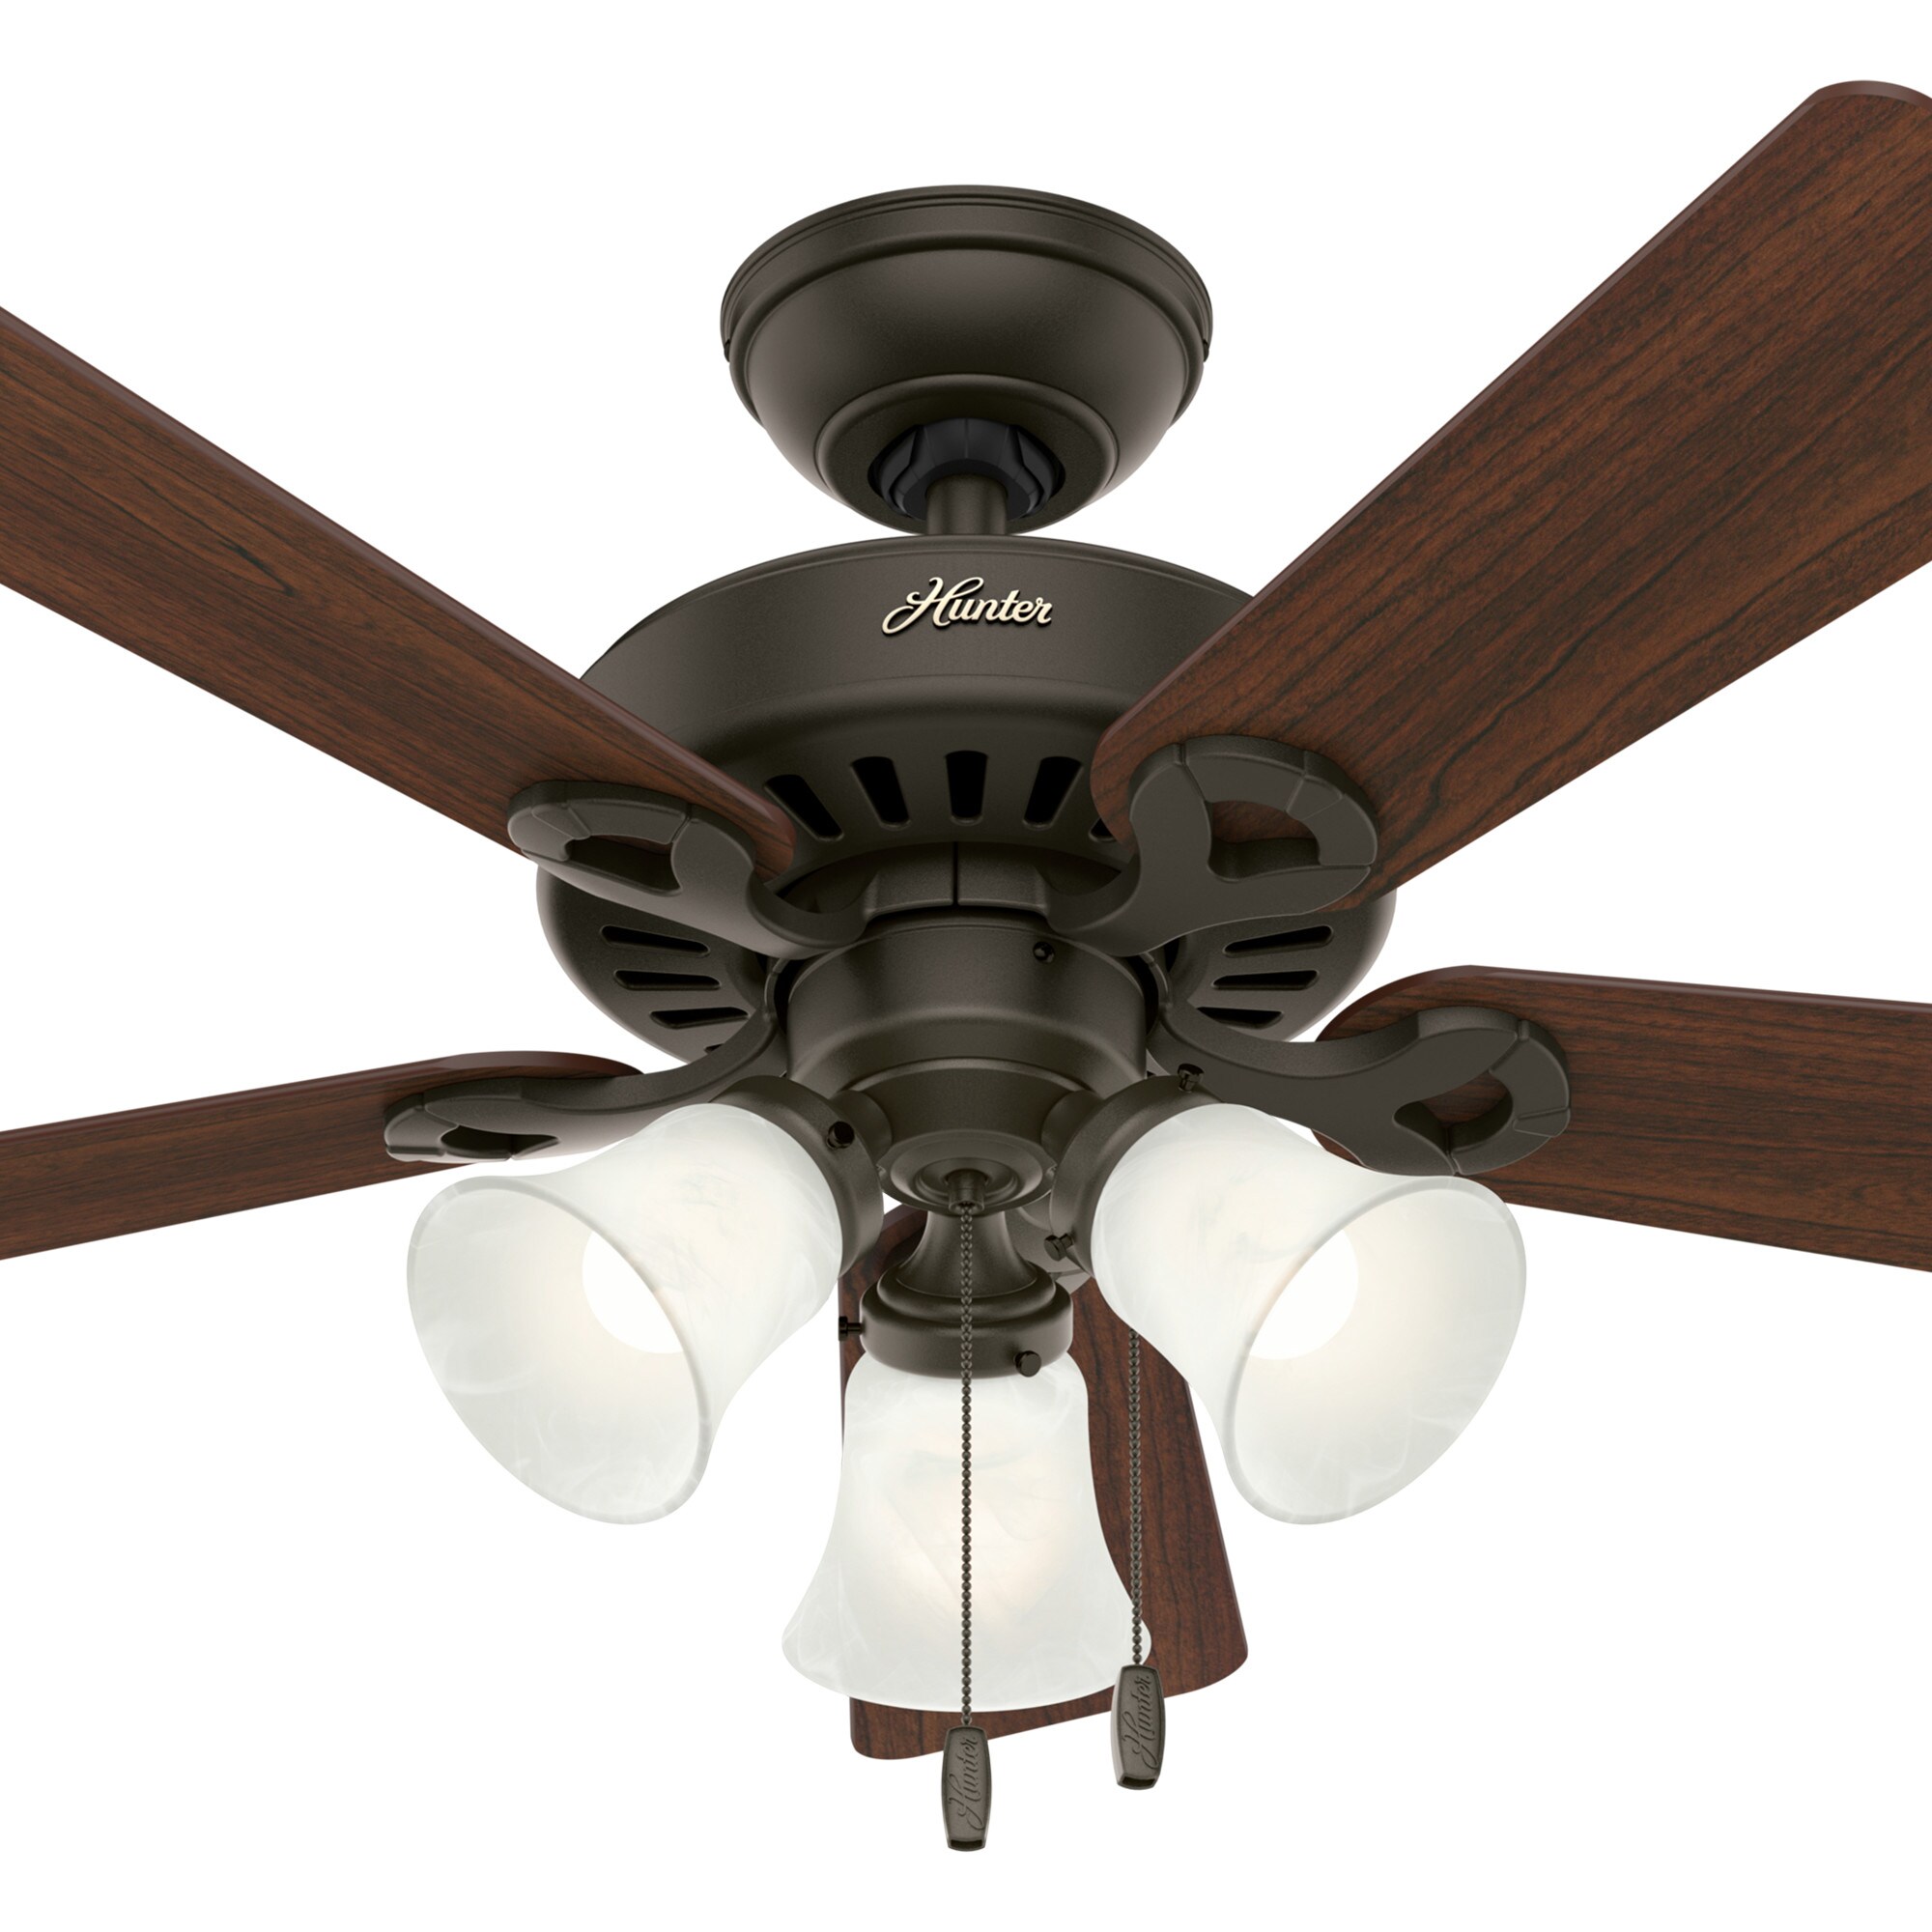 Hunter 44" New Bronze Ceiling Fan with Florence Glass Light Kit 